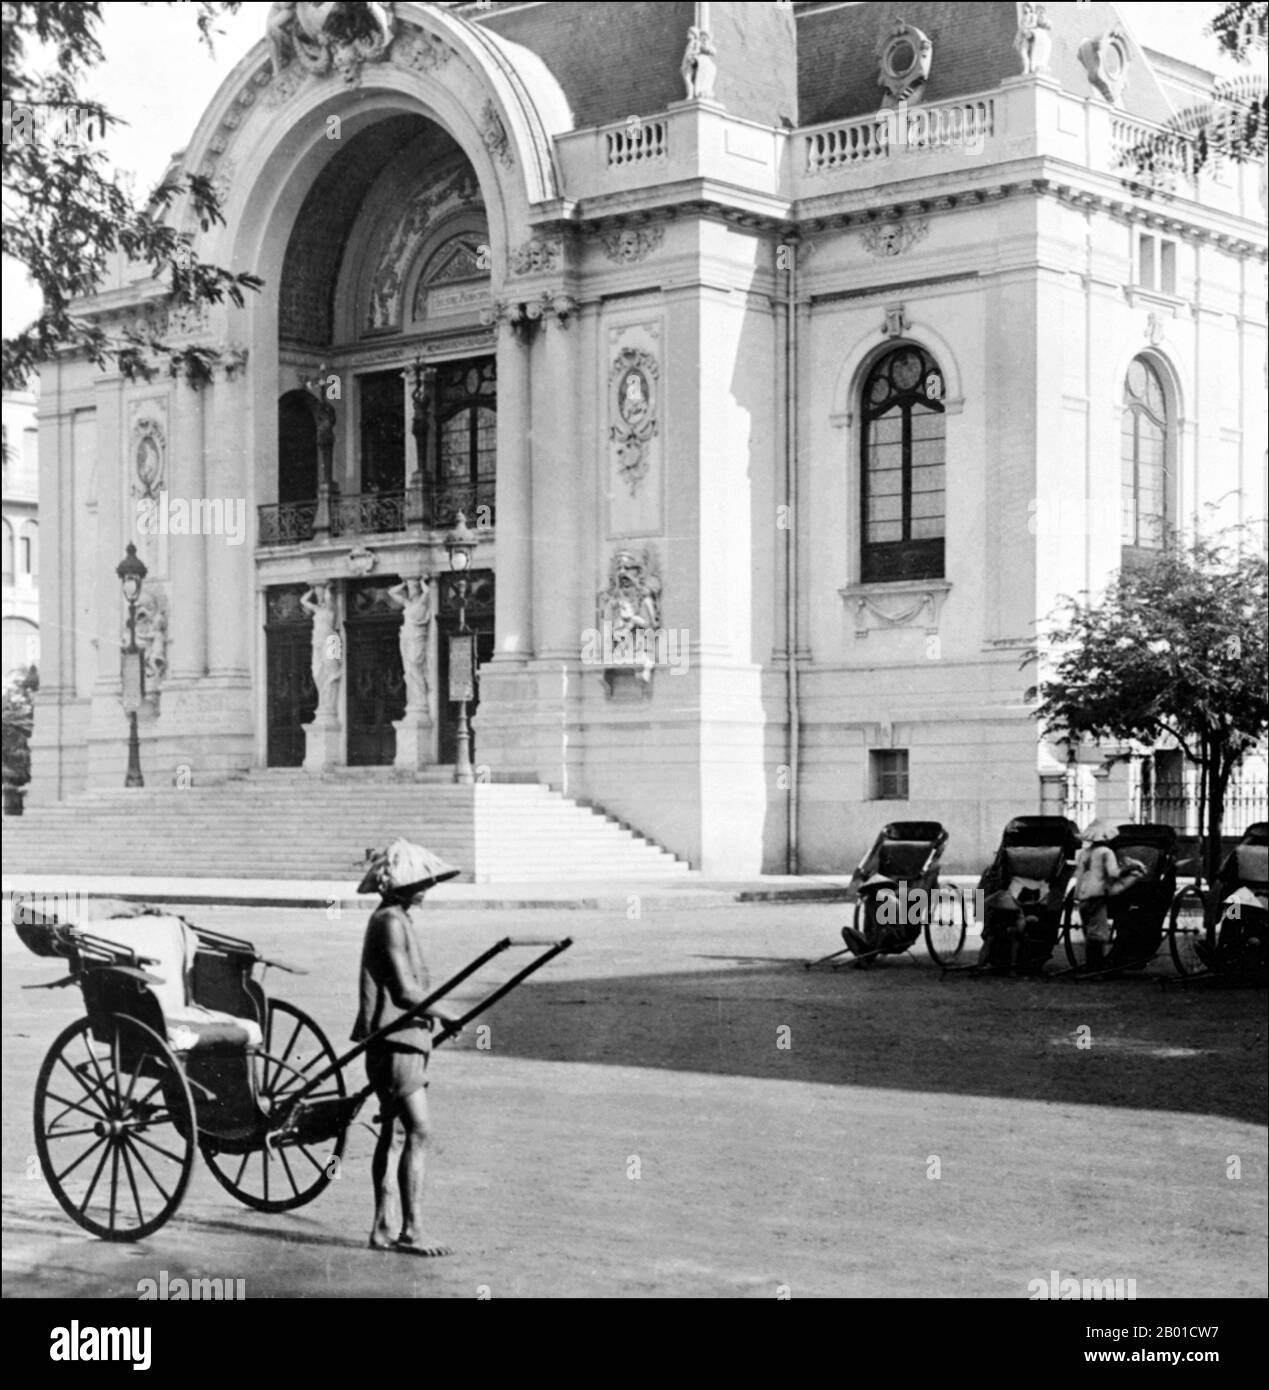 Vietnam: Rickshaw before the Beaux-Arts Municipal Theatre, also called the Saigon Opera House, Saigon, 1915.  The Saigon Opera House (Vietnamese: Thành phố Hồ Chí Minh), an opera house in Ho Chi Minh City, Vietnam, is an example of French Colonial architecture in Vietnam.  Built in 1897 by French architect Ferret Eugene, the 800 seat building was used as the home of the Lower House assembly of South Vietnam after 1956. It was not until 1975 that it was again used as a theatre, and restored in 1995. Stock Photo